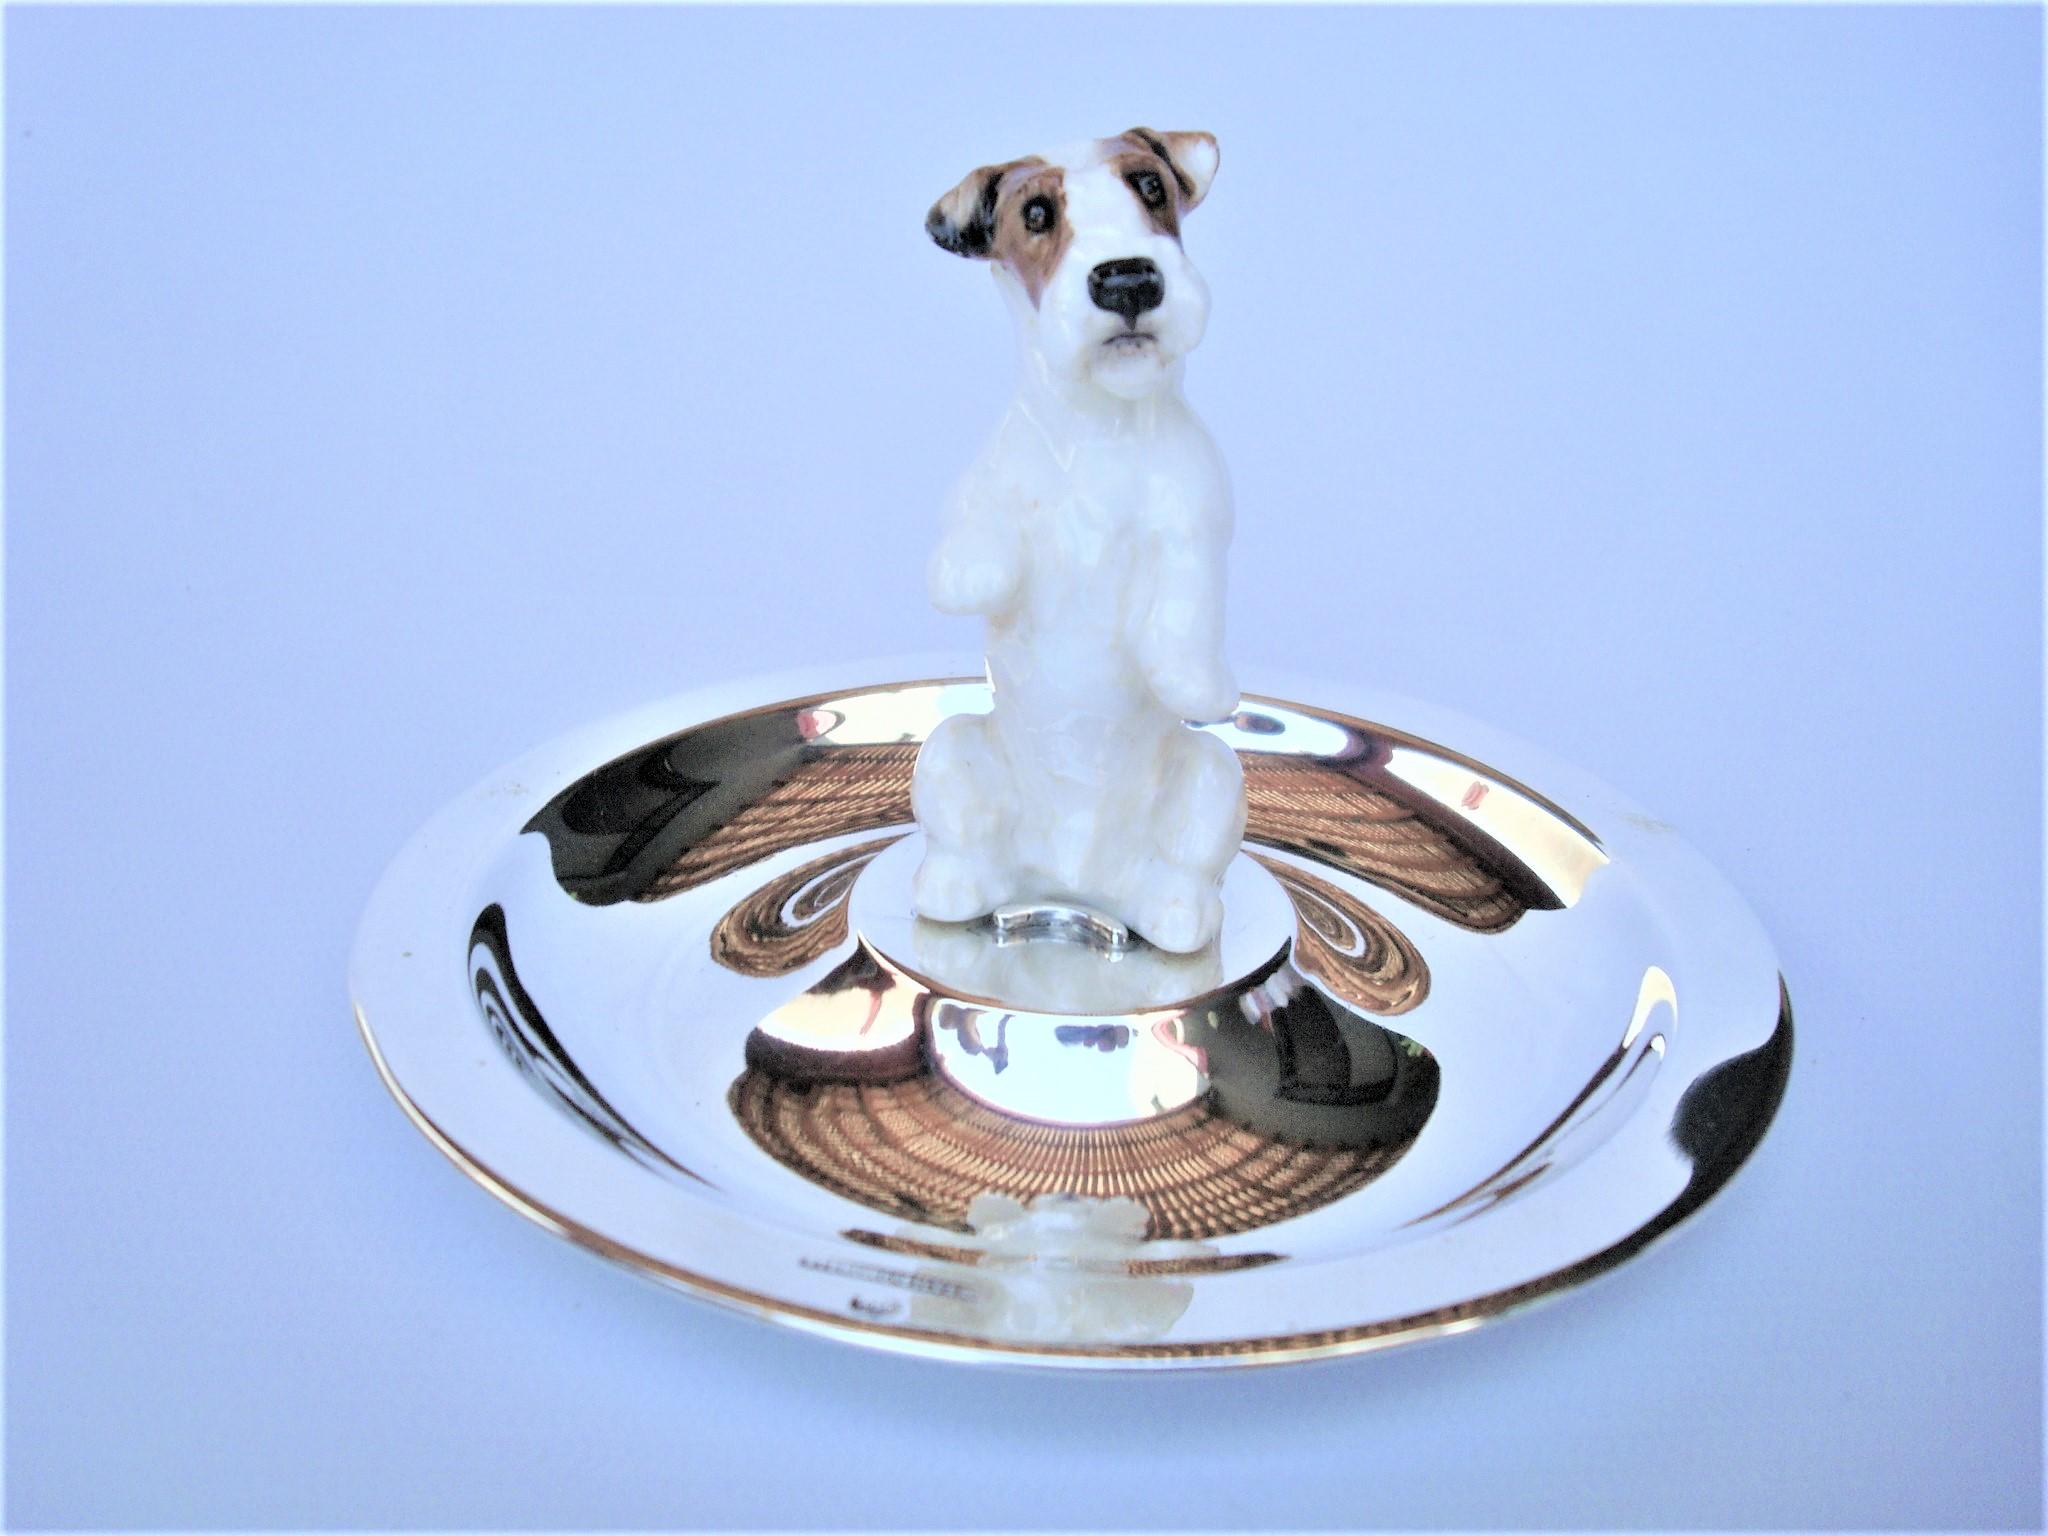 Sterling Silver Jack Russel Jewelry dish.
Lovely Jack Russel Dog made of porcelain mounted over a sterling silver Jewelry dish / plate.
 